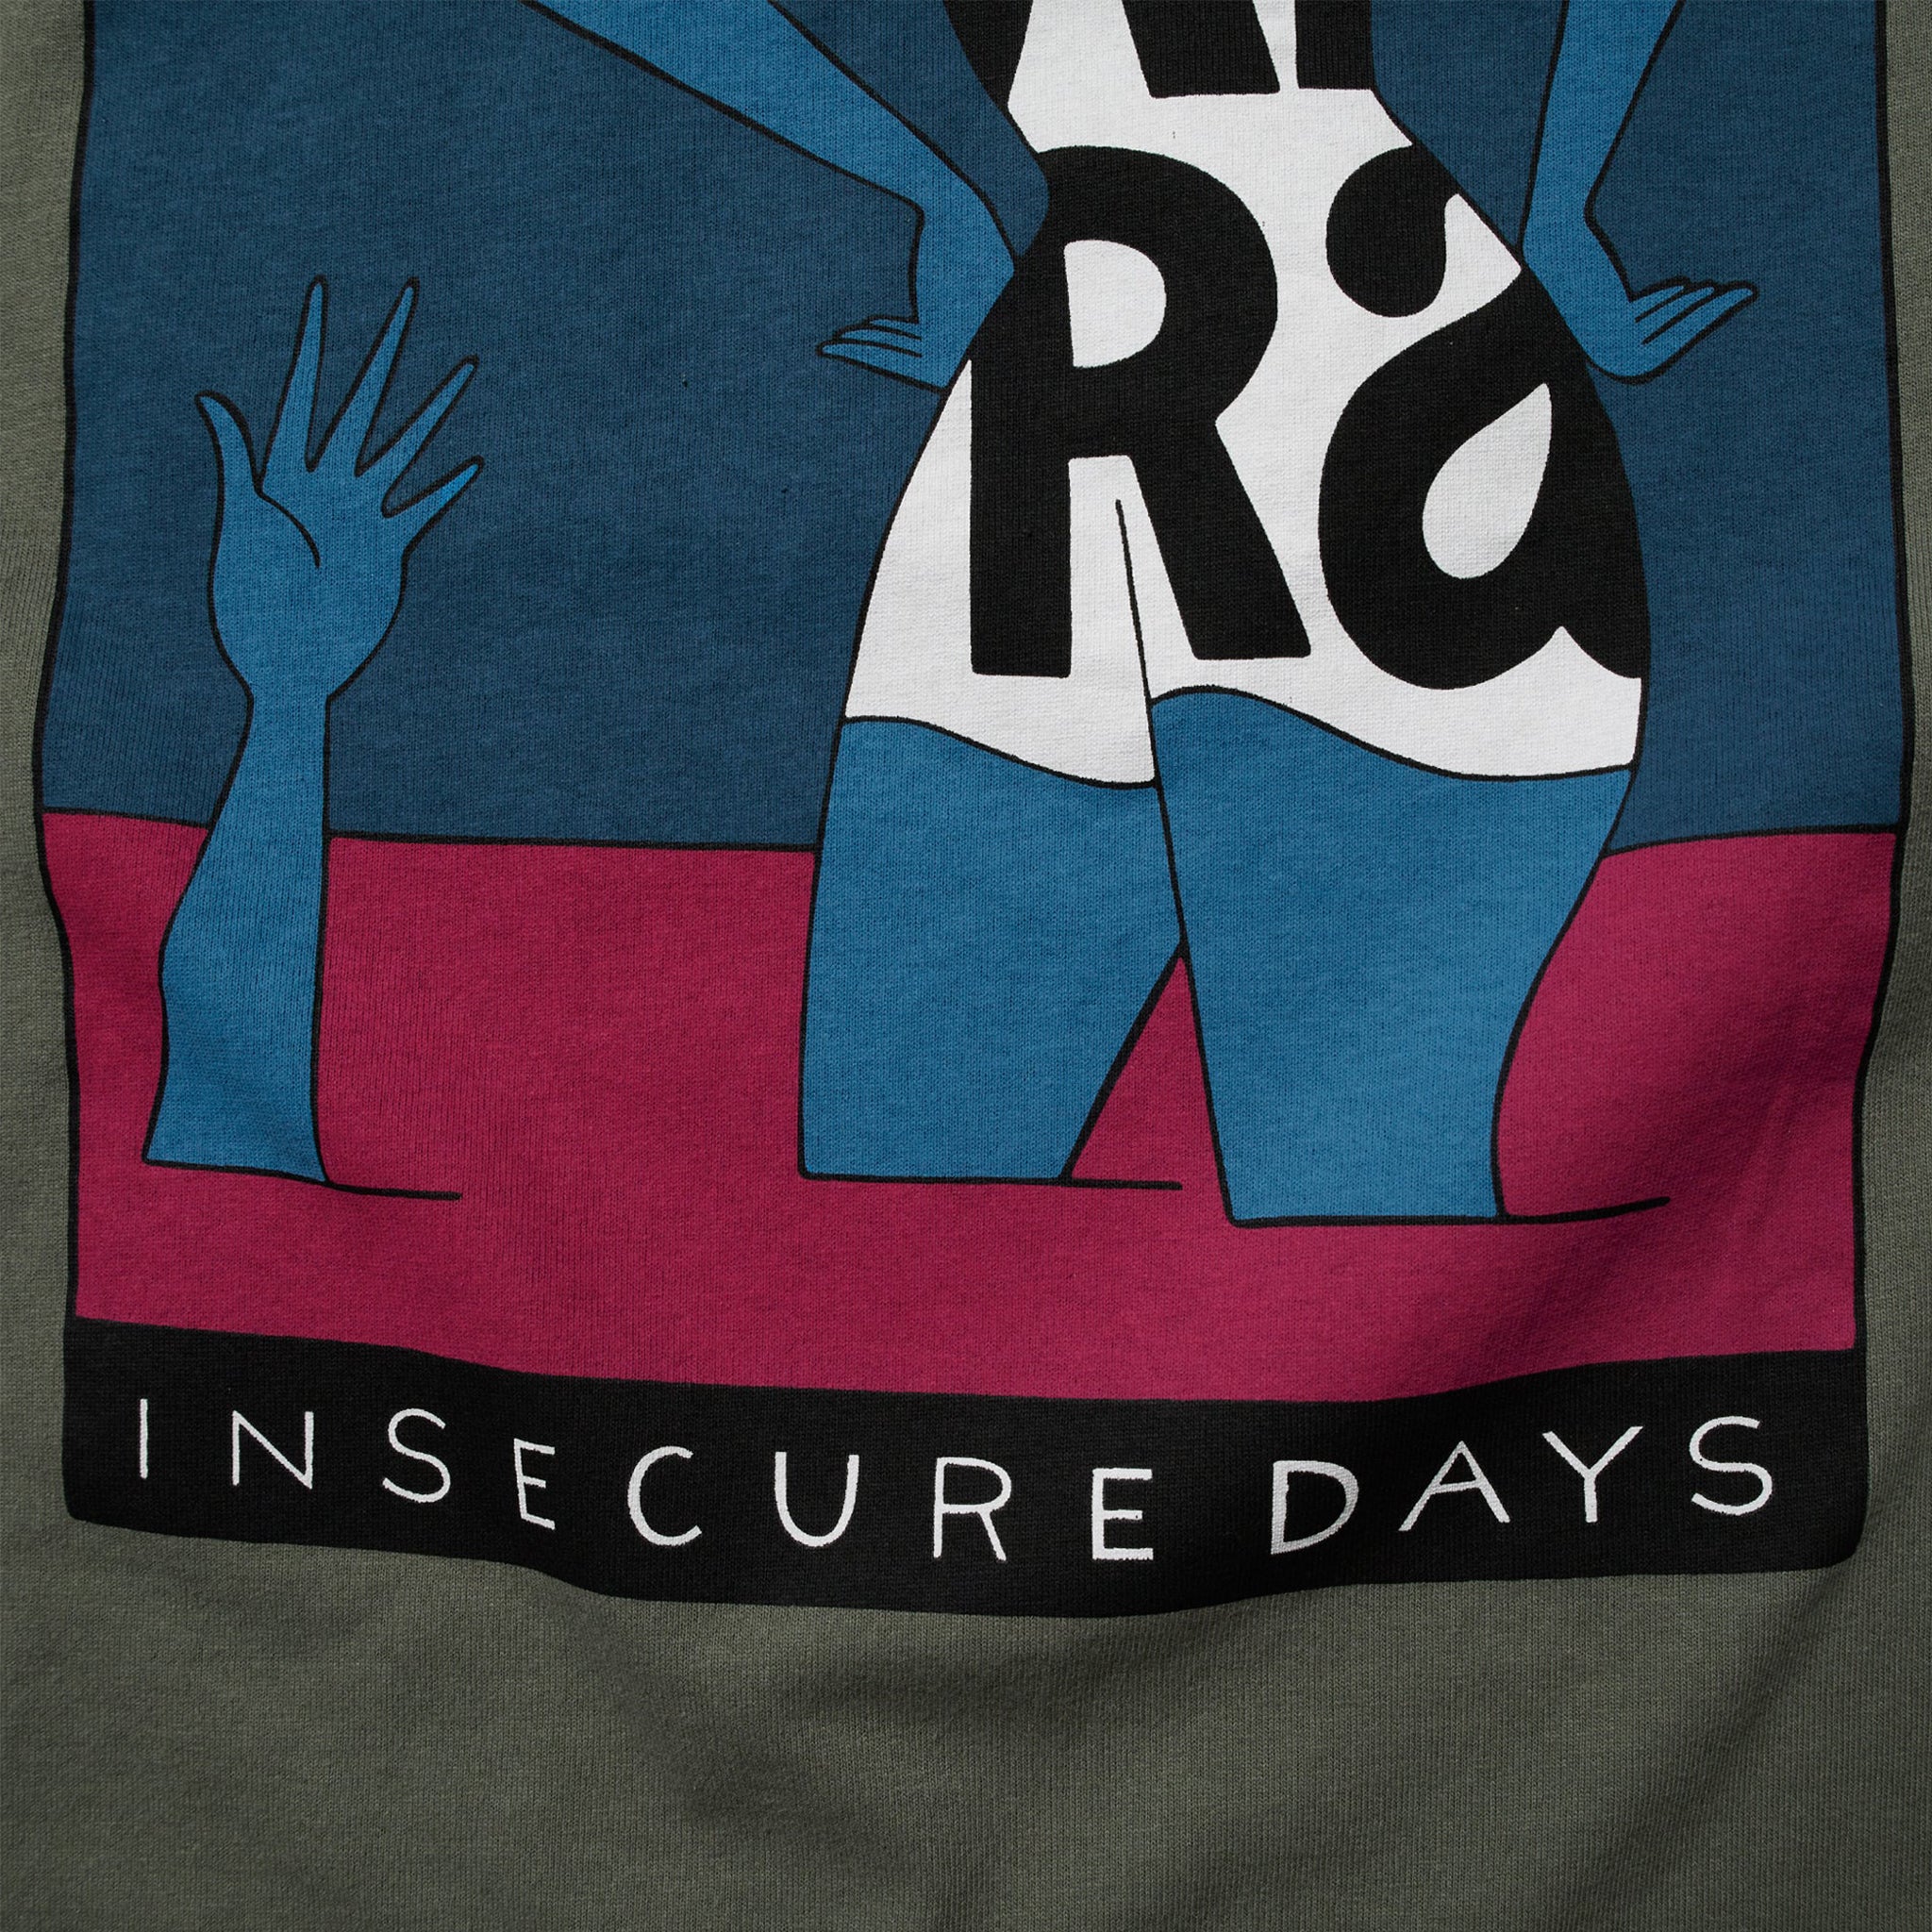 INSECURE DAYS S/S T-SHIRT